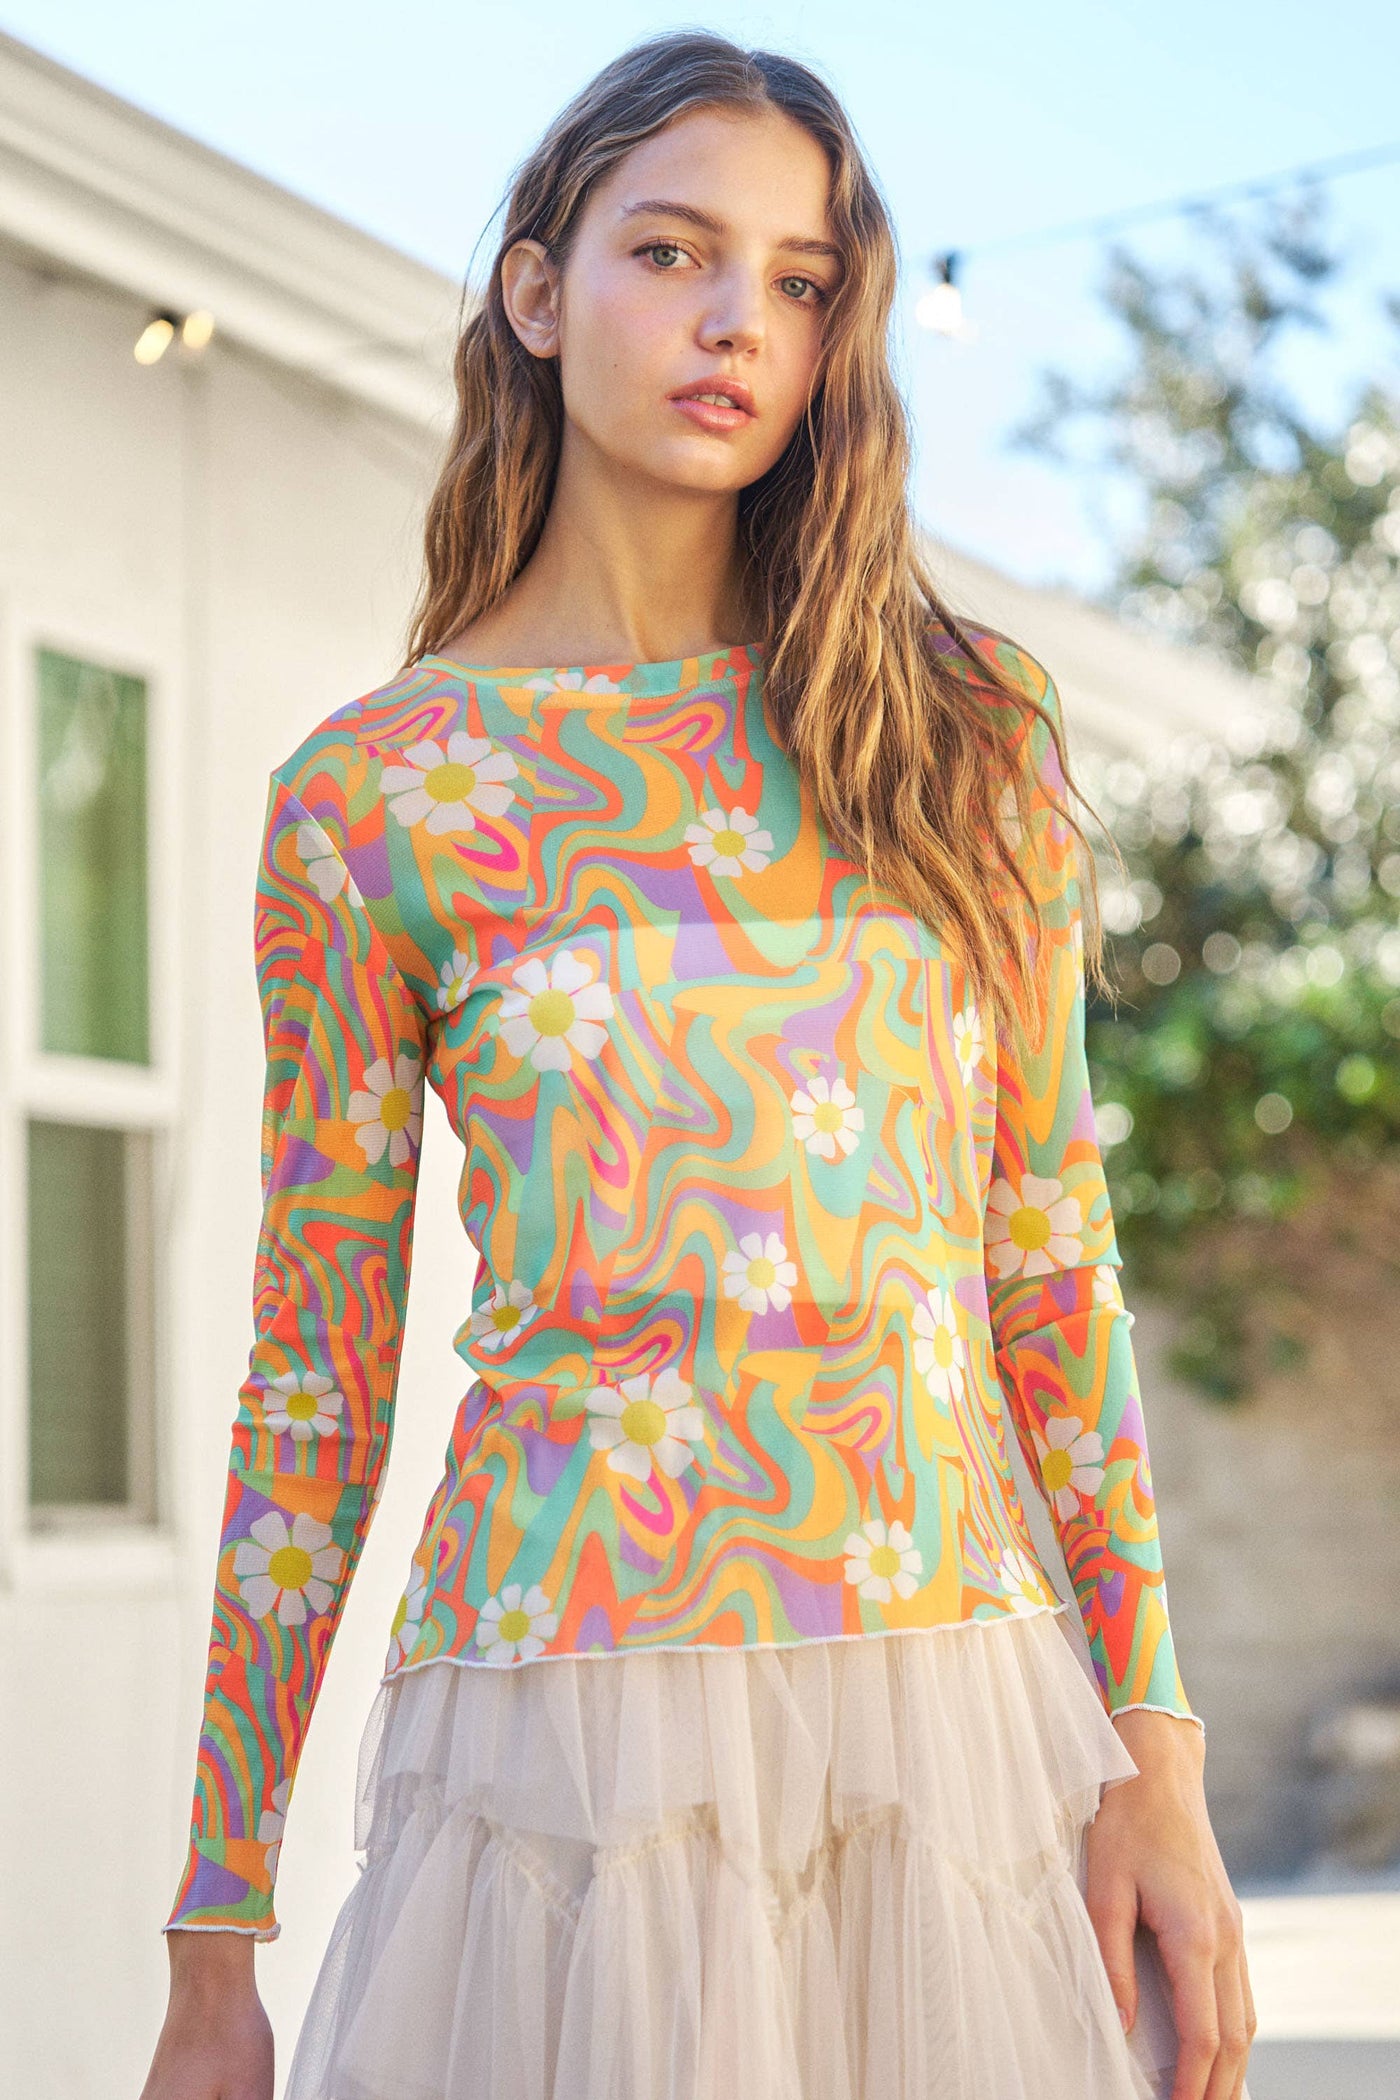 Floral Swirl Colorful Mesh Top